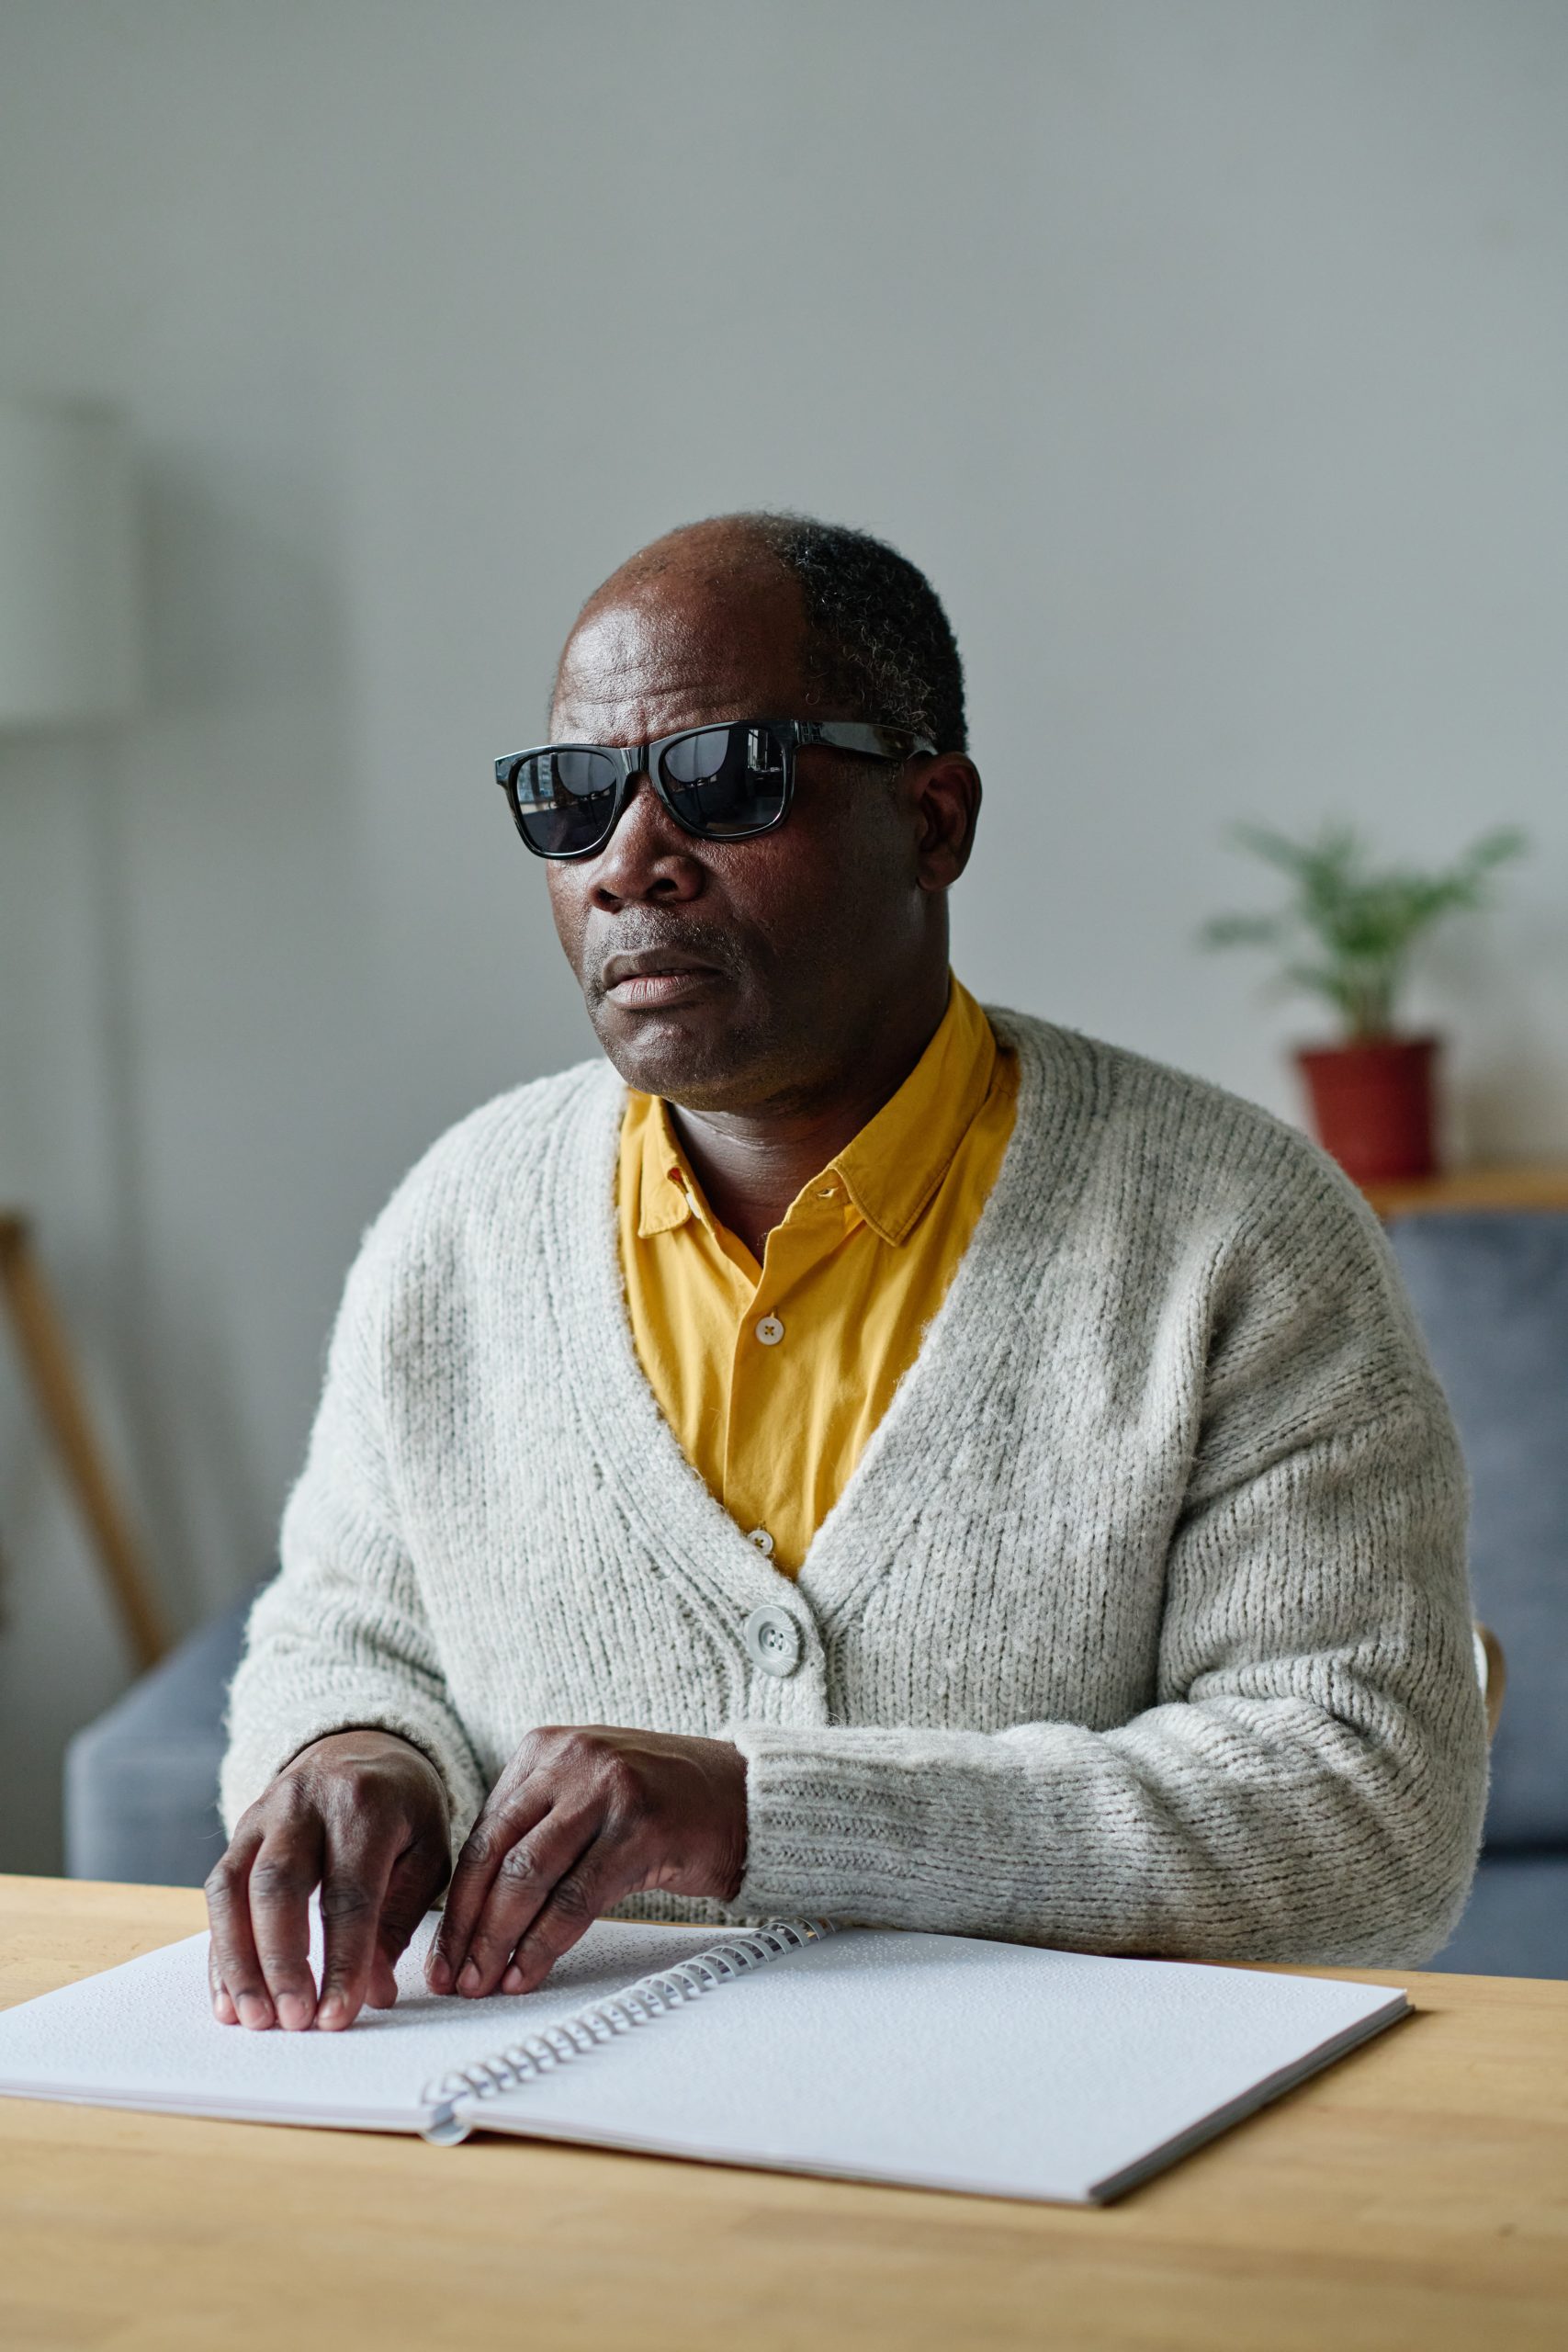 Blind People Are Better at Sensing Their Heartbeats: Study